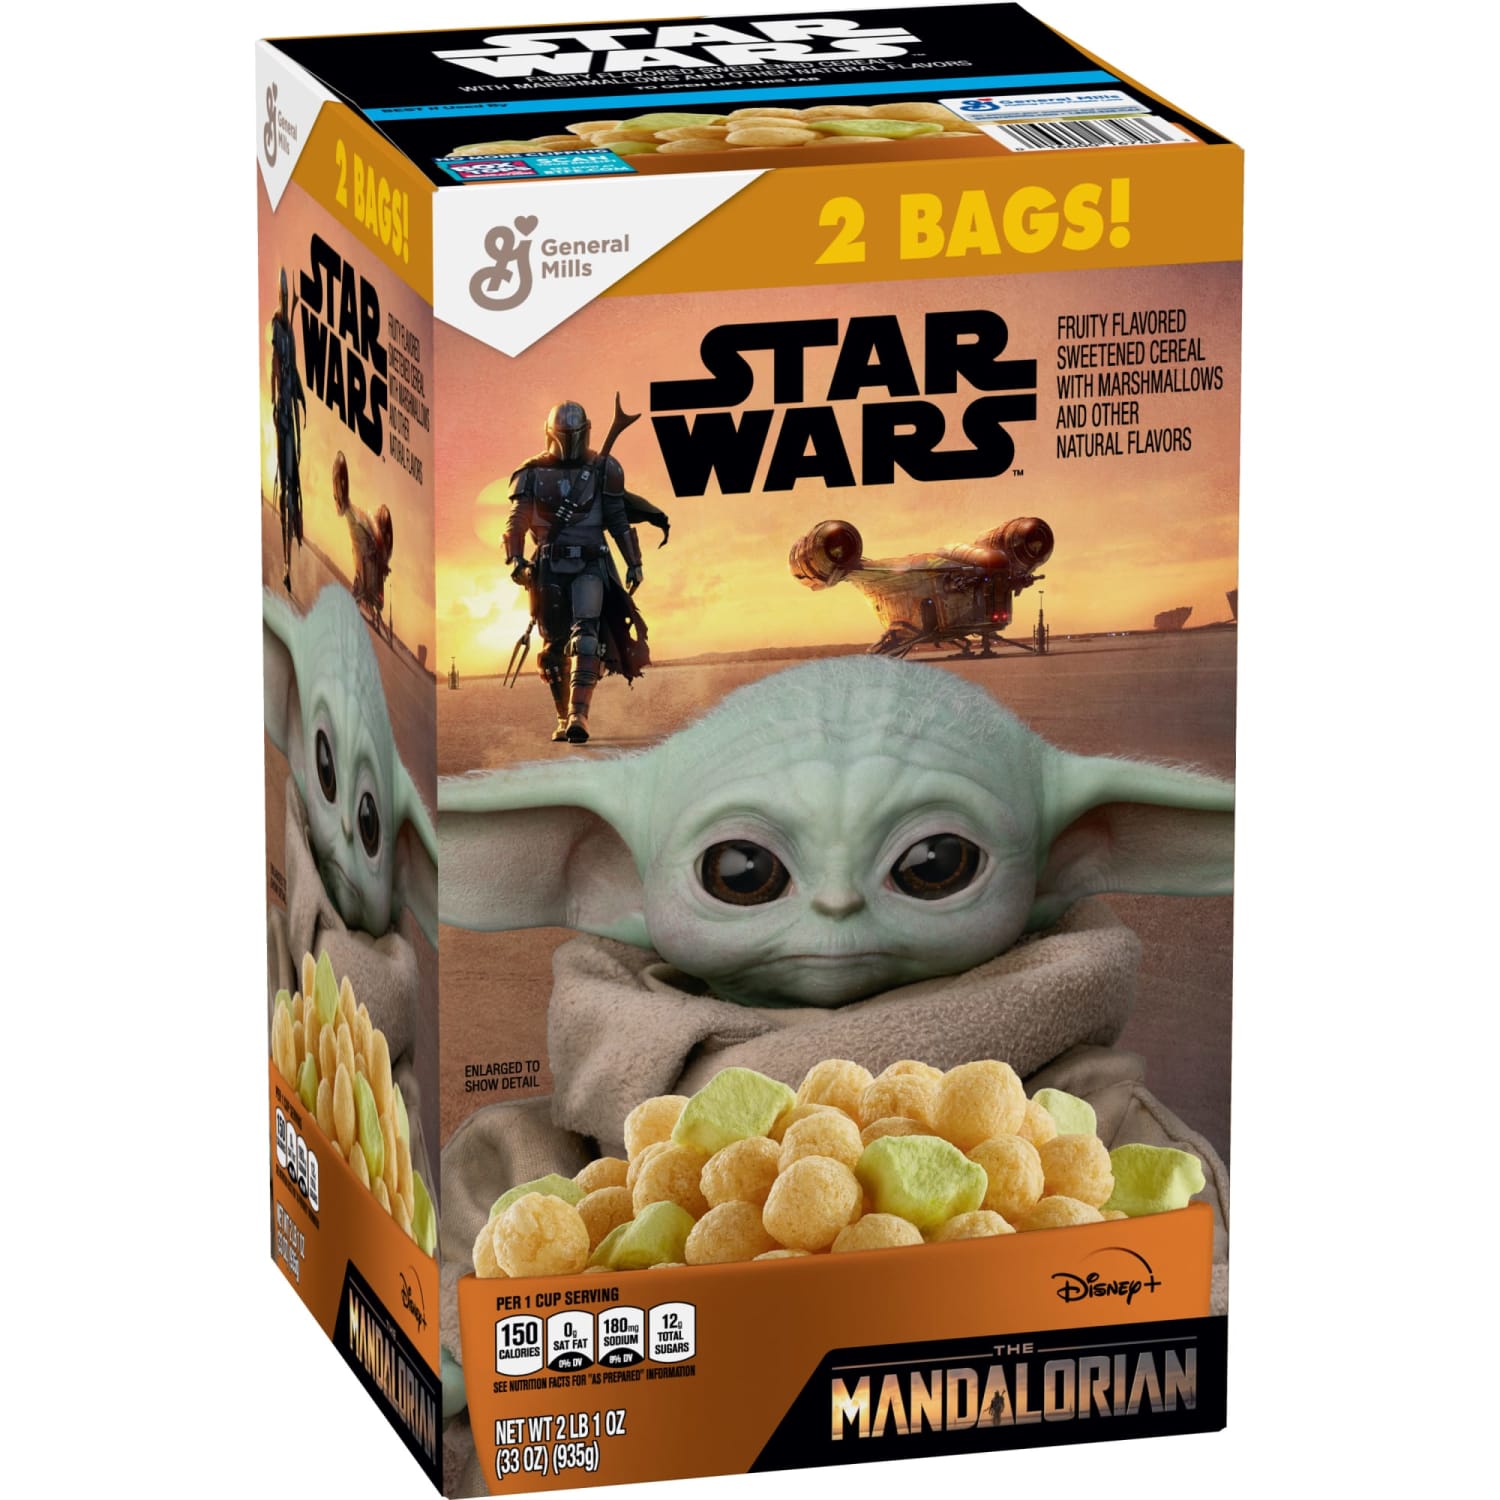 Ready for a Mandalorian cereal breakfast adventure?